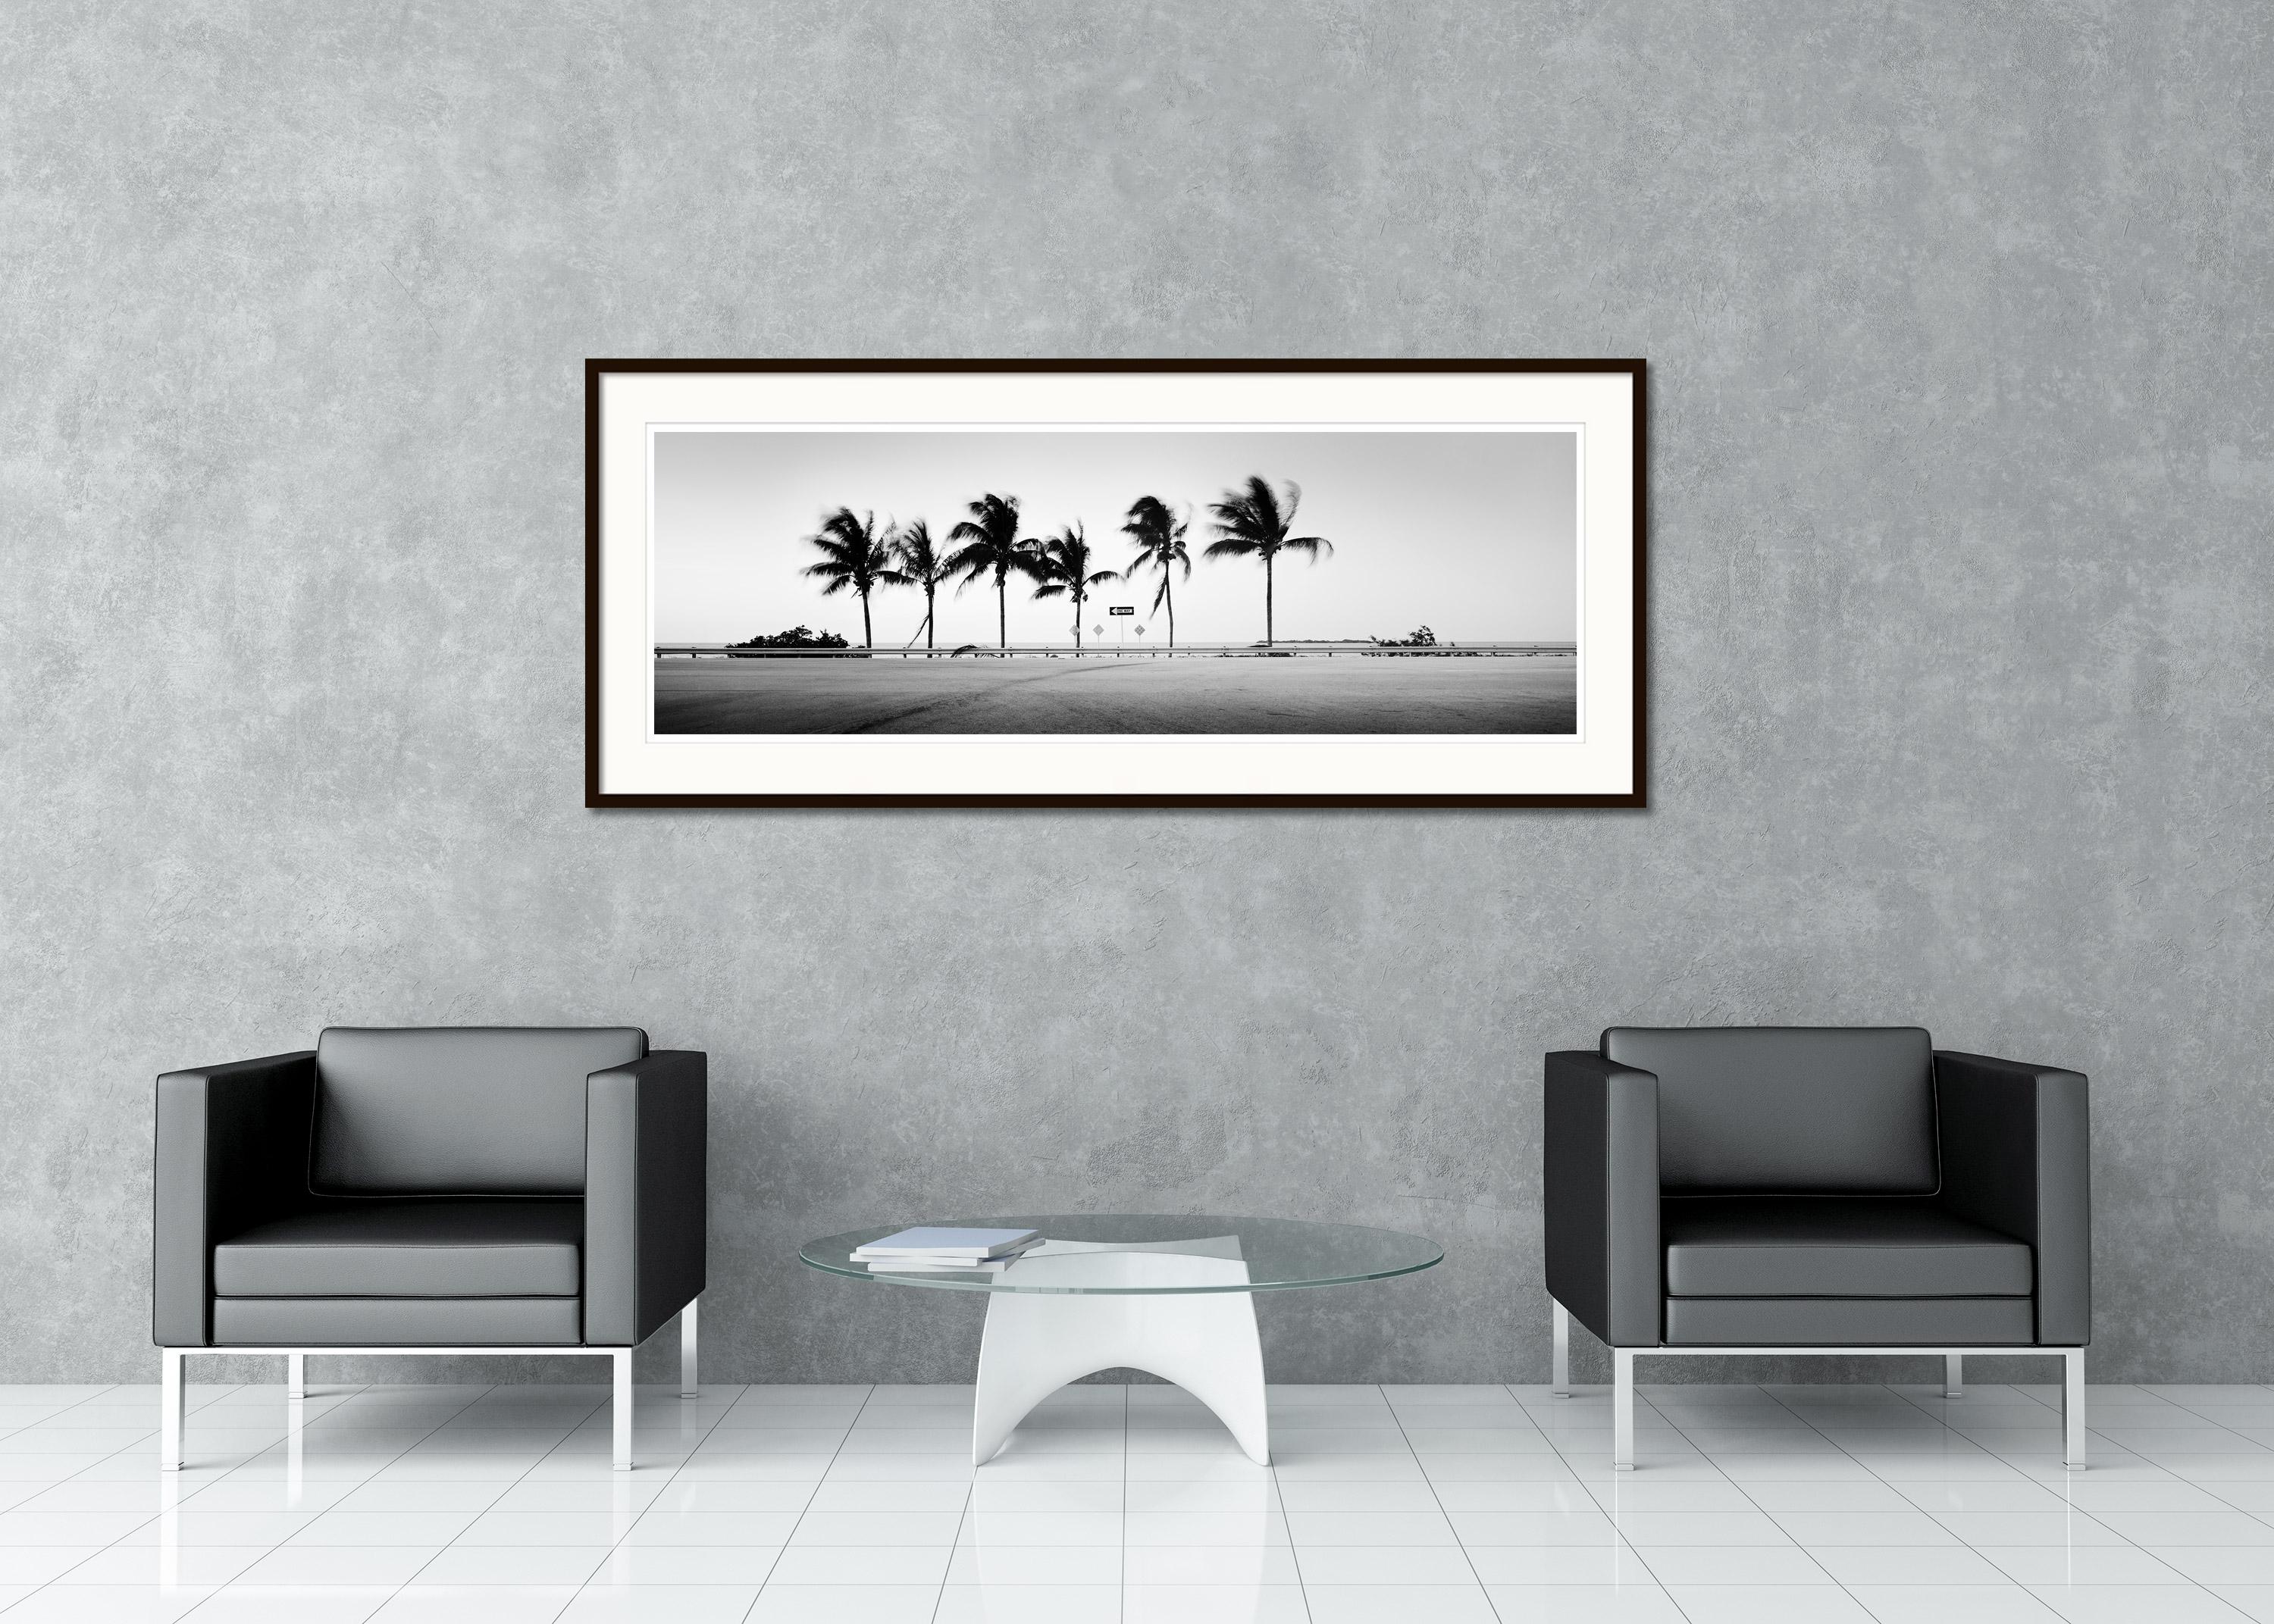 Black and white fine art panorama landscape photography. Archival pigment ink print as part of a limited edition of 7. All Gerald Berghammer prints are made to order in limited editions on Hahnemuehle Photo Rag Baryta. Each print is stamped on the